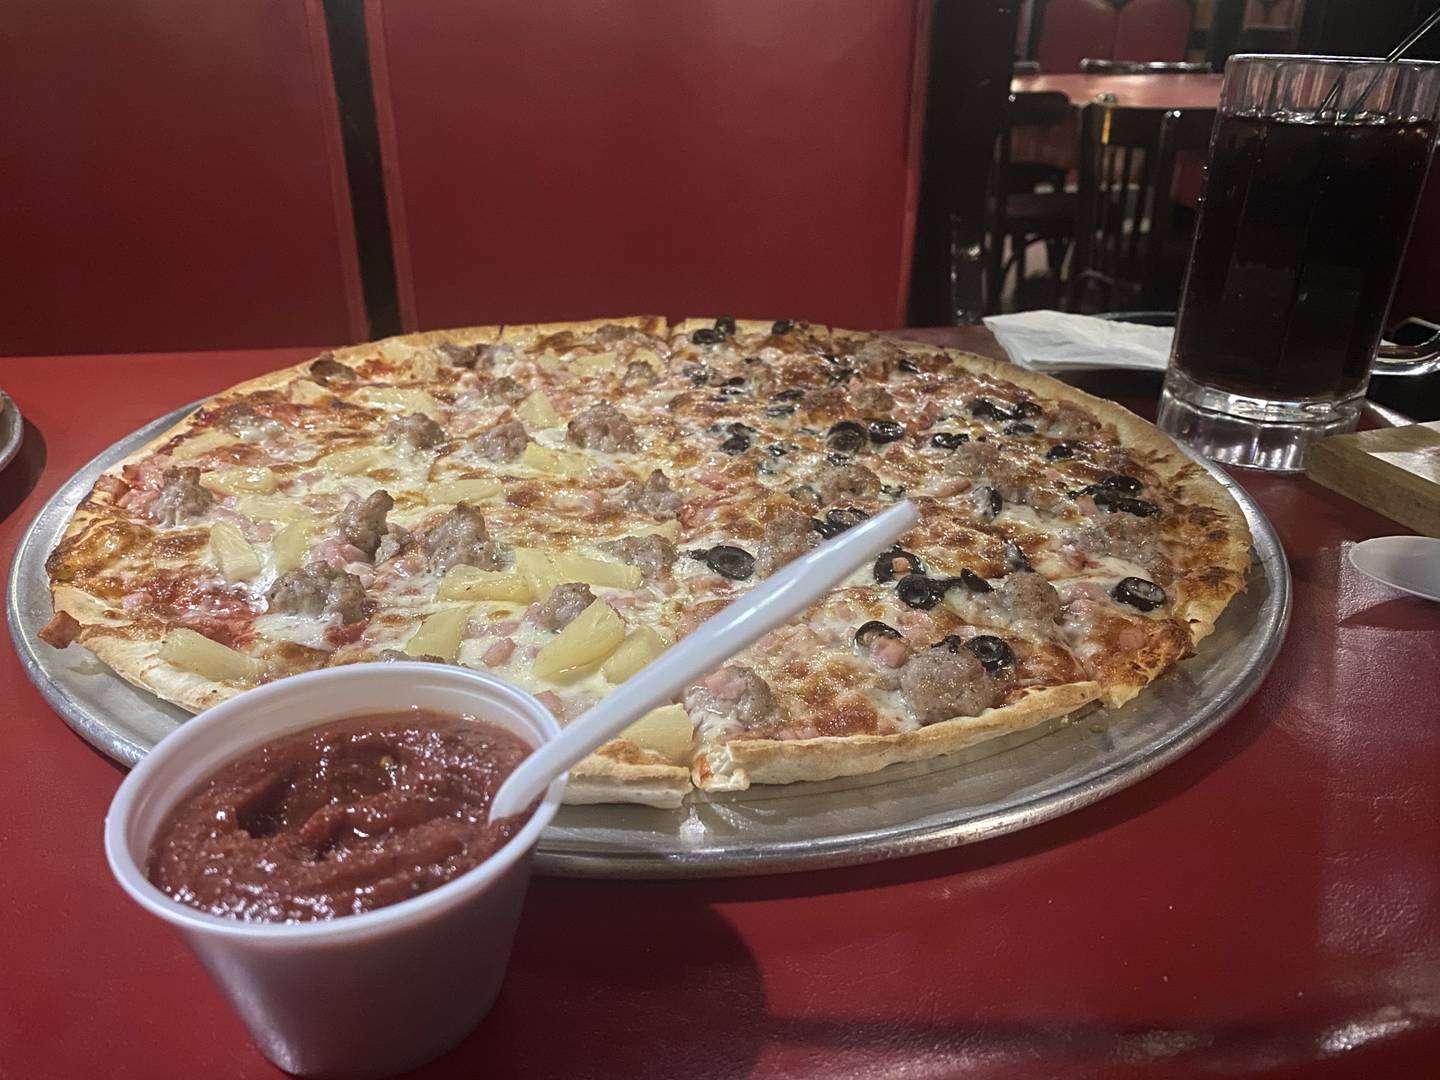 Whatever your preferred toppings, the Mystery Diner highly recommends slathering your pie with Bianchi's hot sauce, a tomato paste-like condiment that brings both a tangy flavor and a bit of heat.